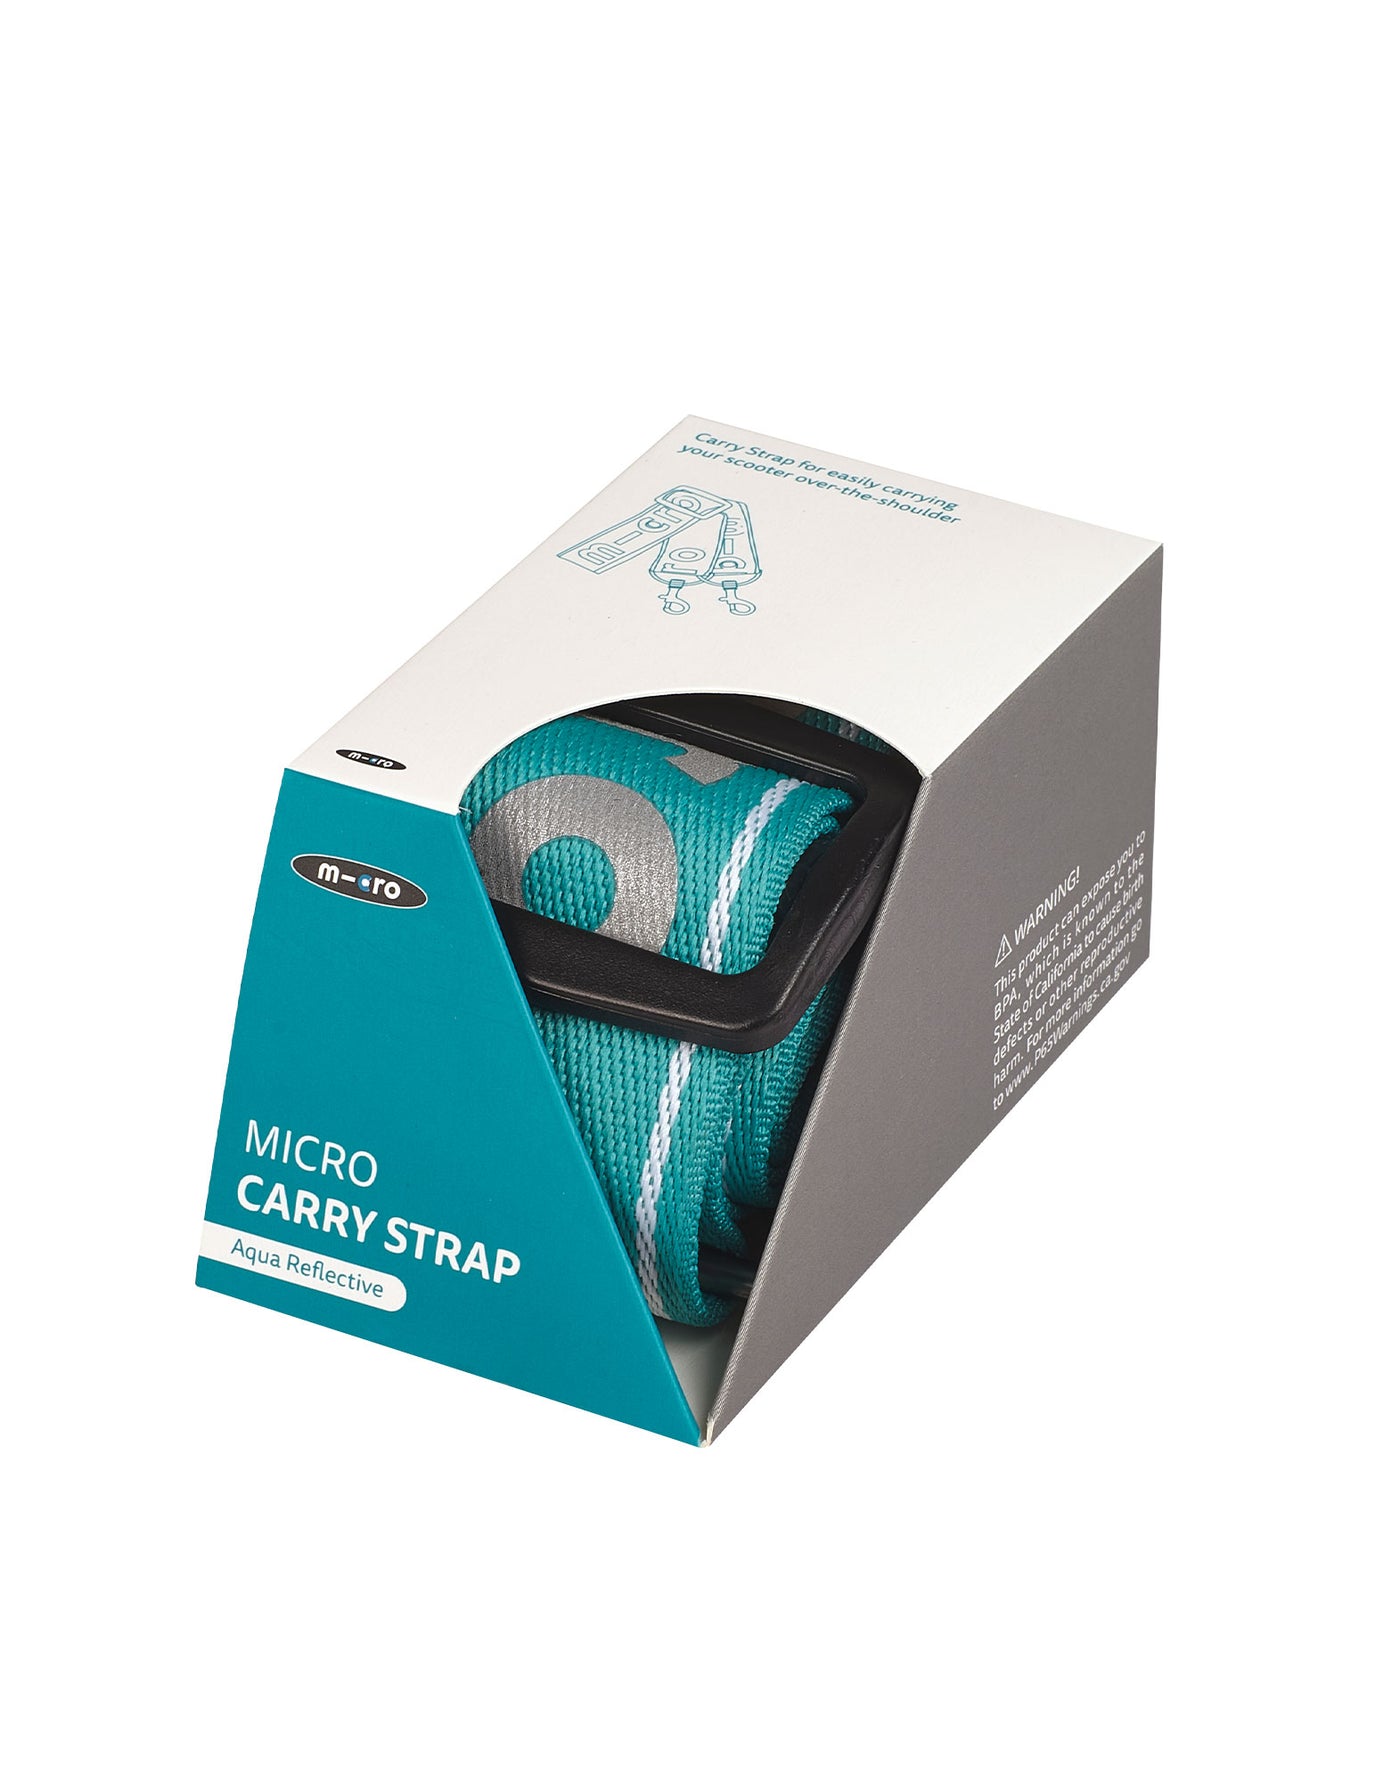 aqua reflective scooter carry strap in box